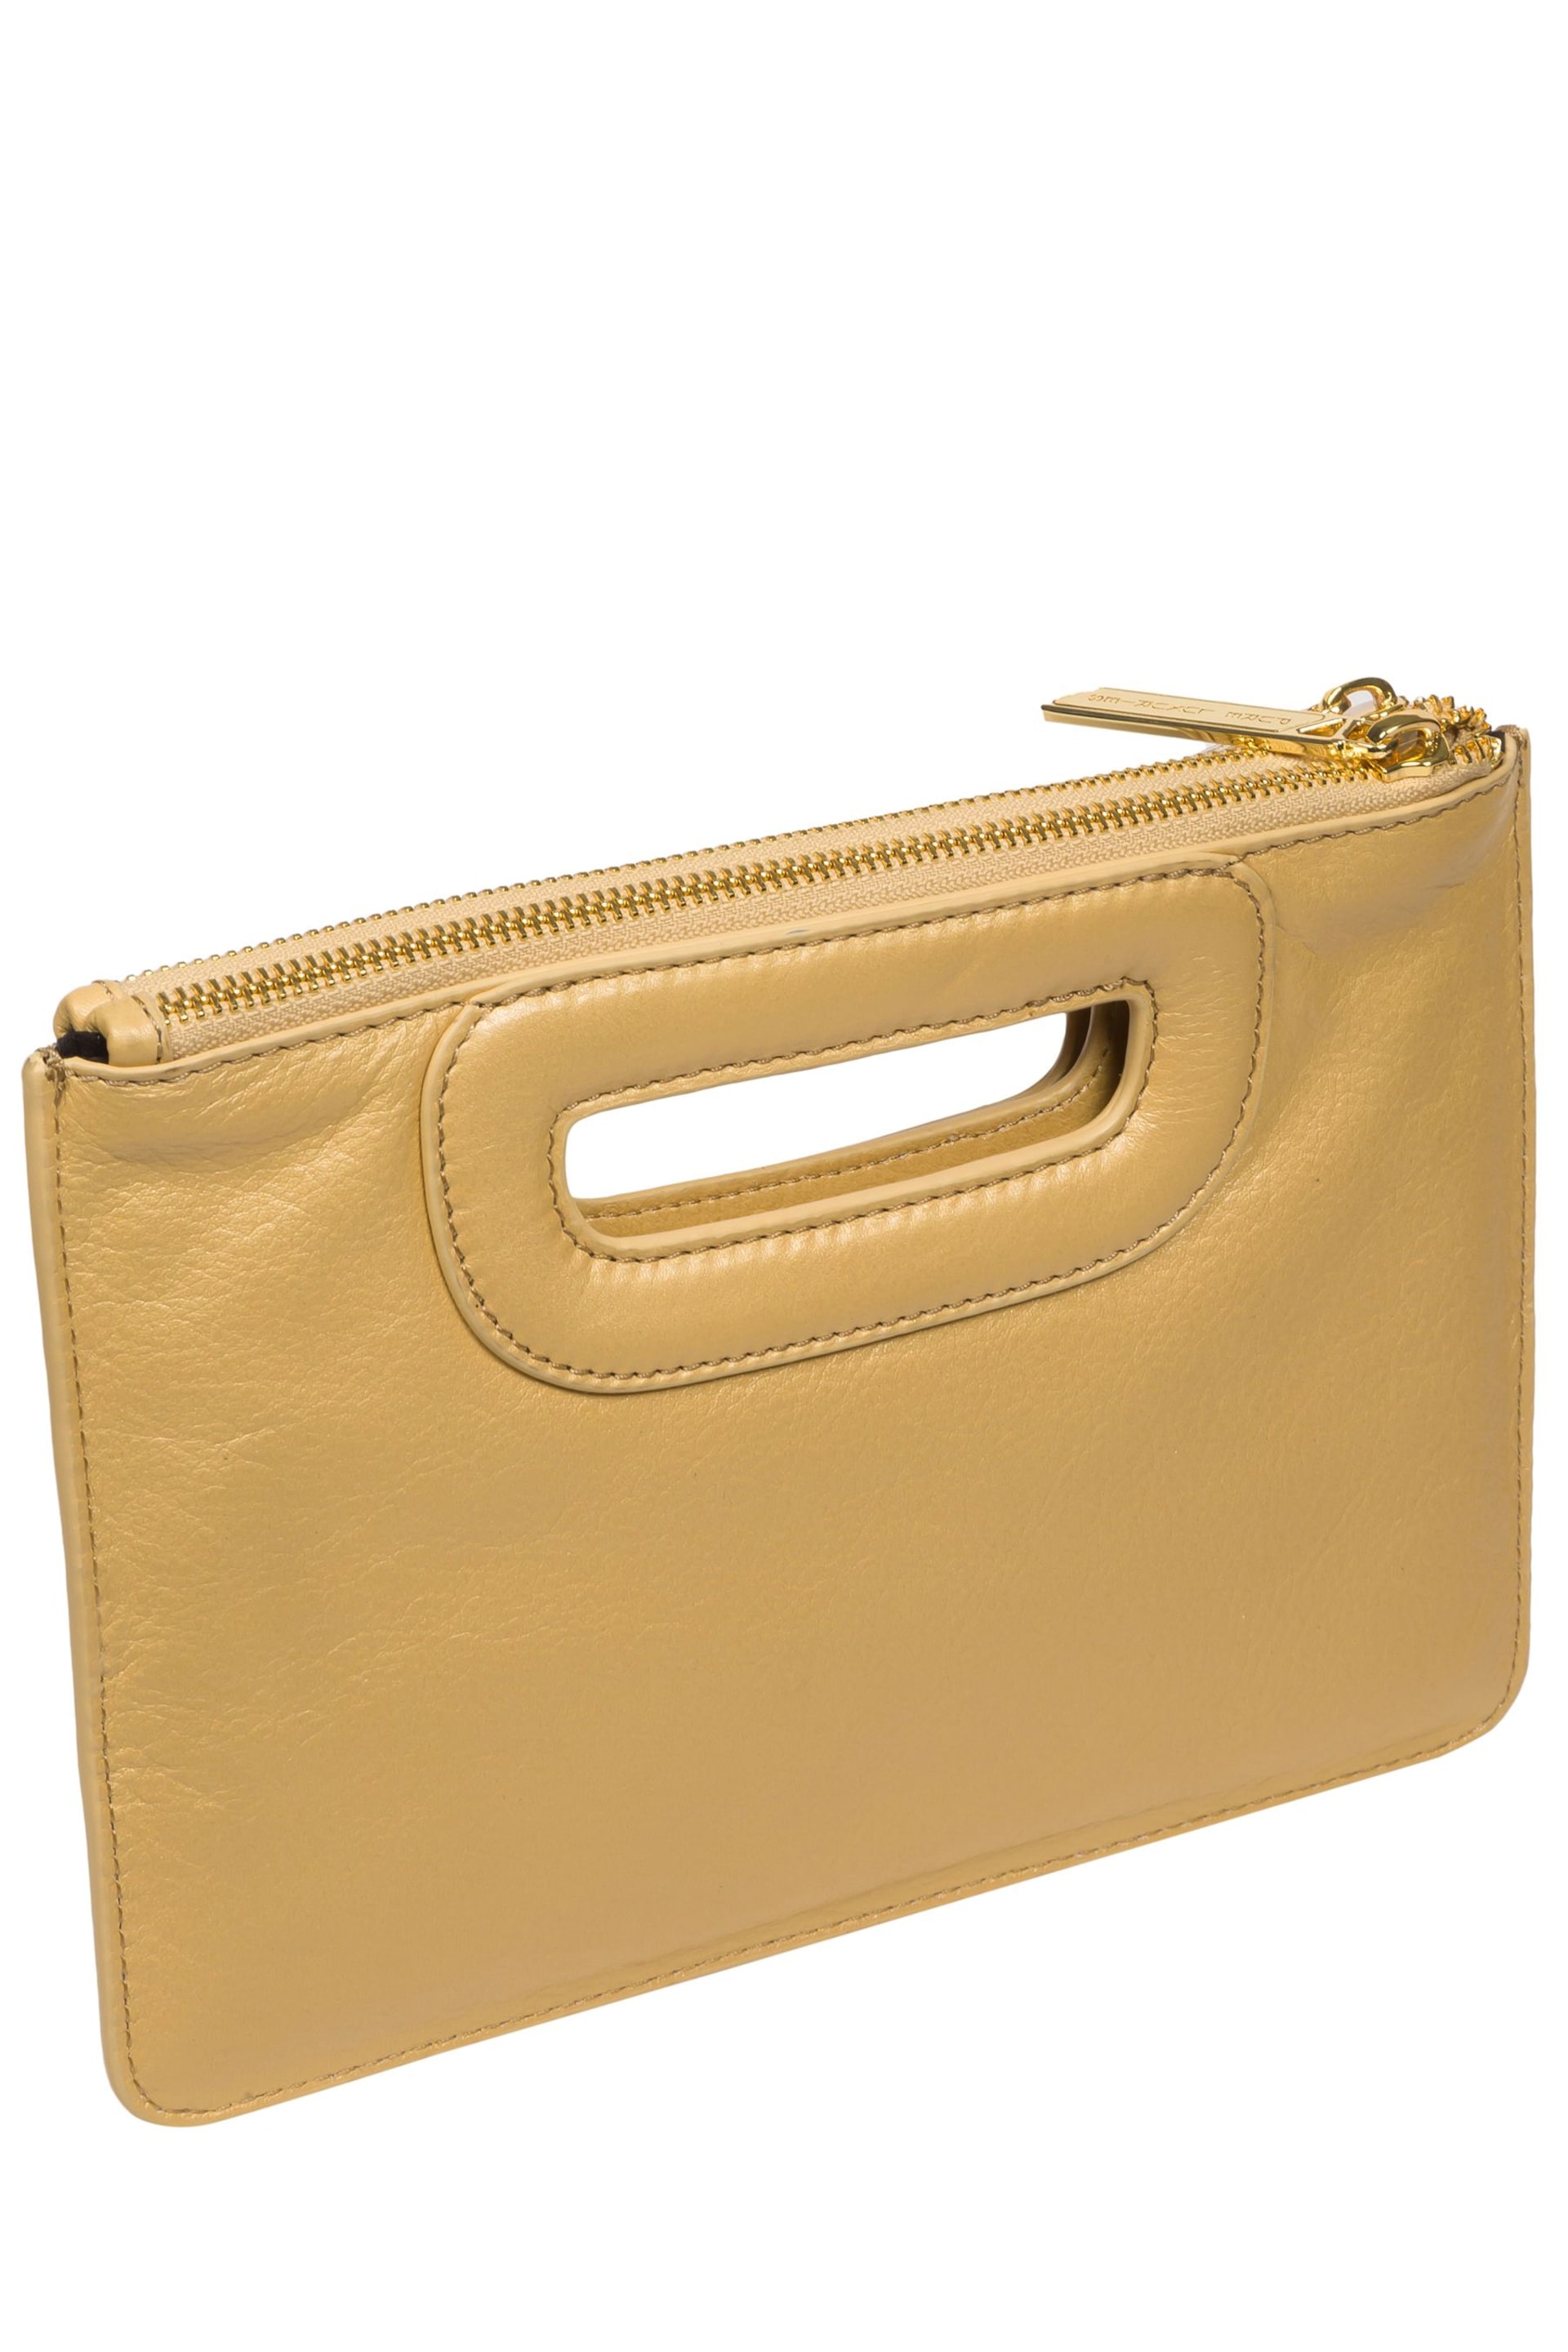 Pure Luxuries London Esher Leather Clutch Bag - Image 5 of 6